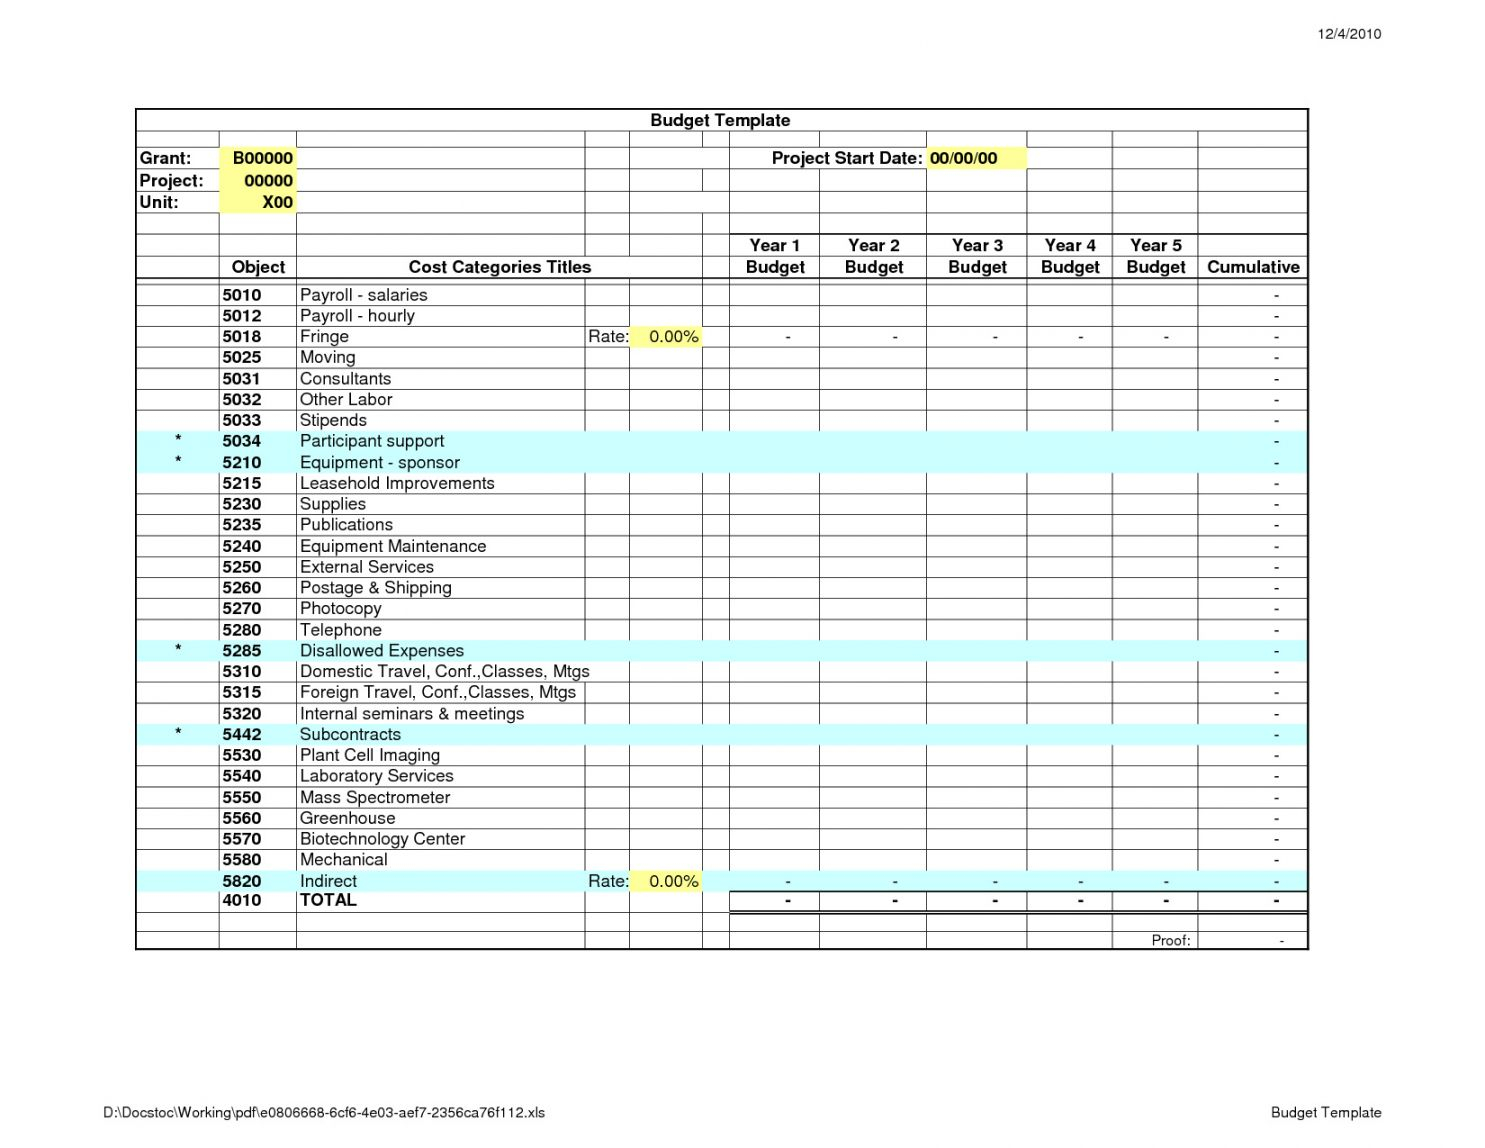 Film Art Department Budget Template For Office Move Budget Template Inside Office Move Budget Template